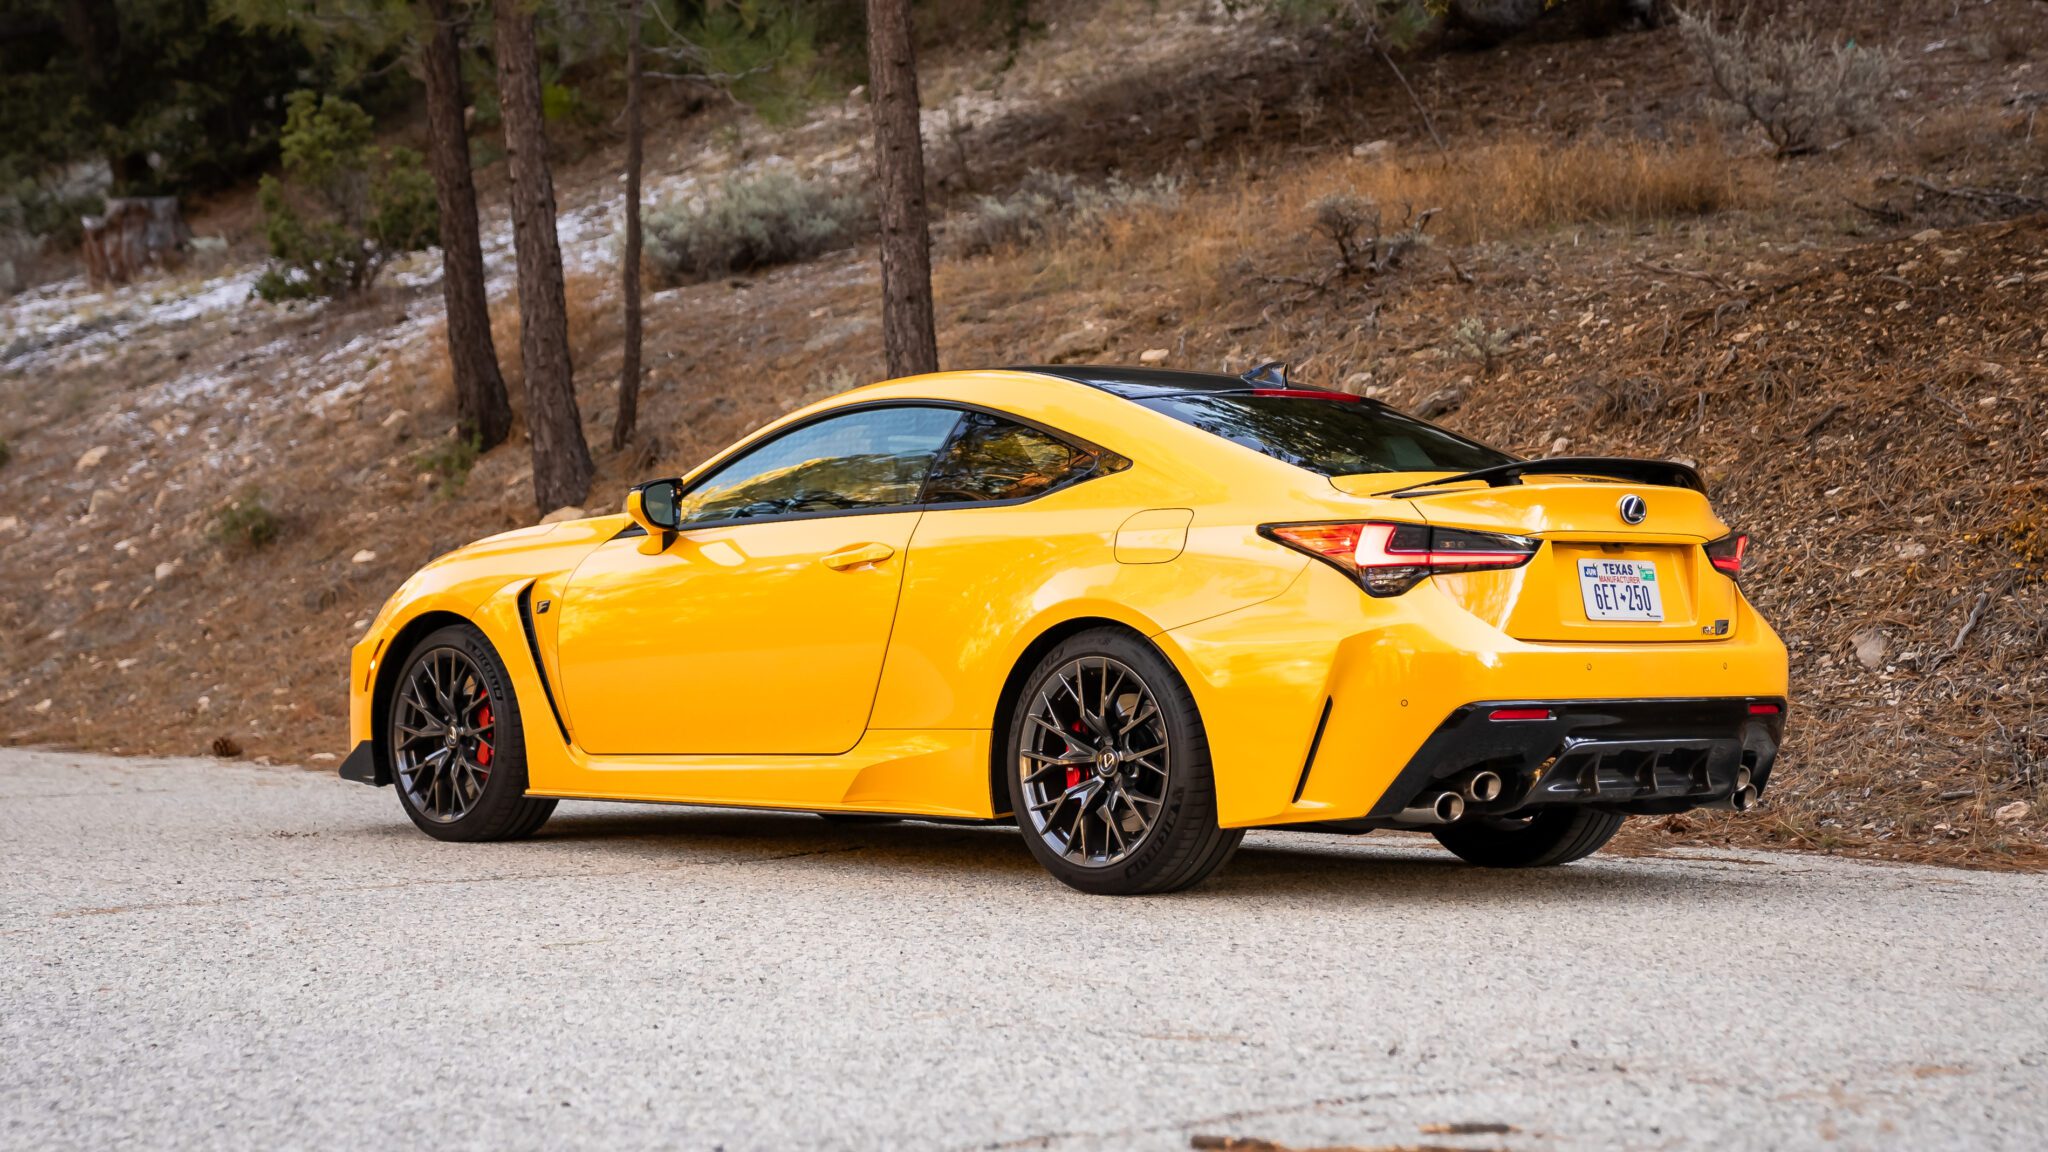 An image of a Lexus RC F parked outdoors.